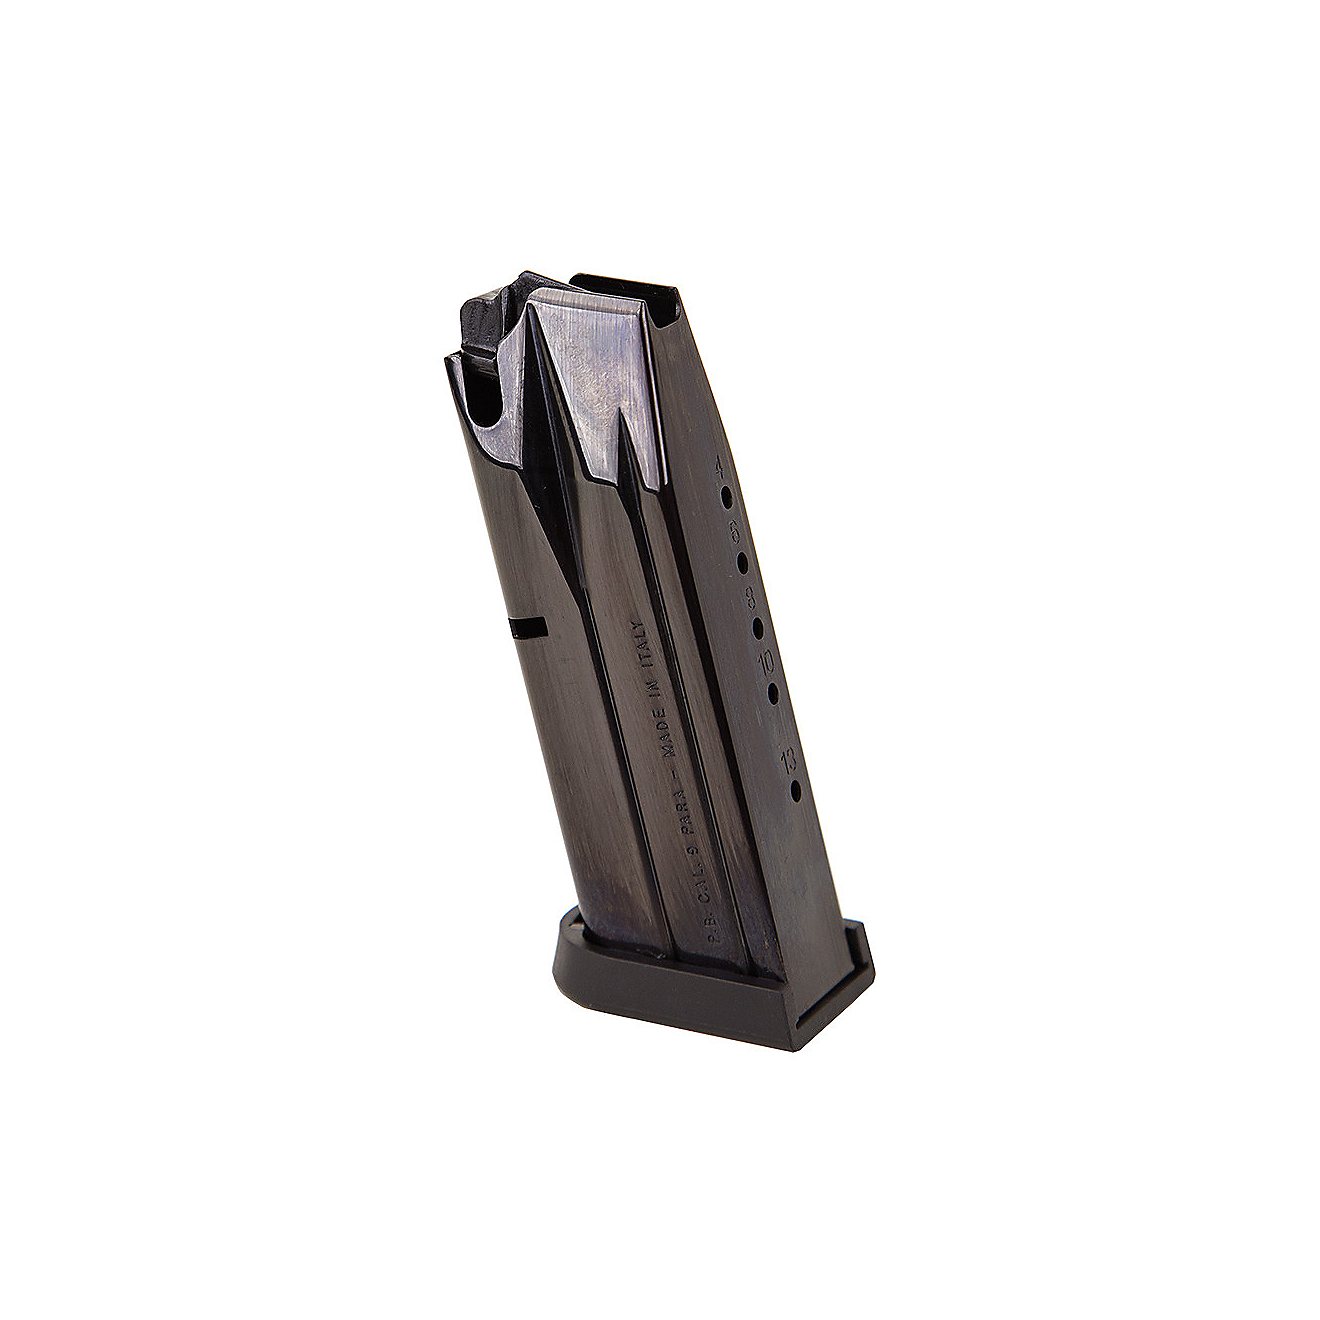 Beretta Px4 Storm Sub Compact 40sw Magazine 10 Round JMPX4S4F Ships Fast for sale online 